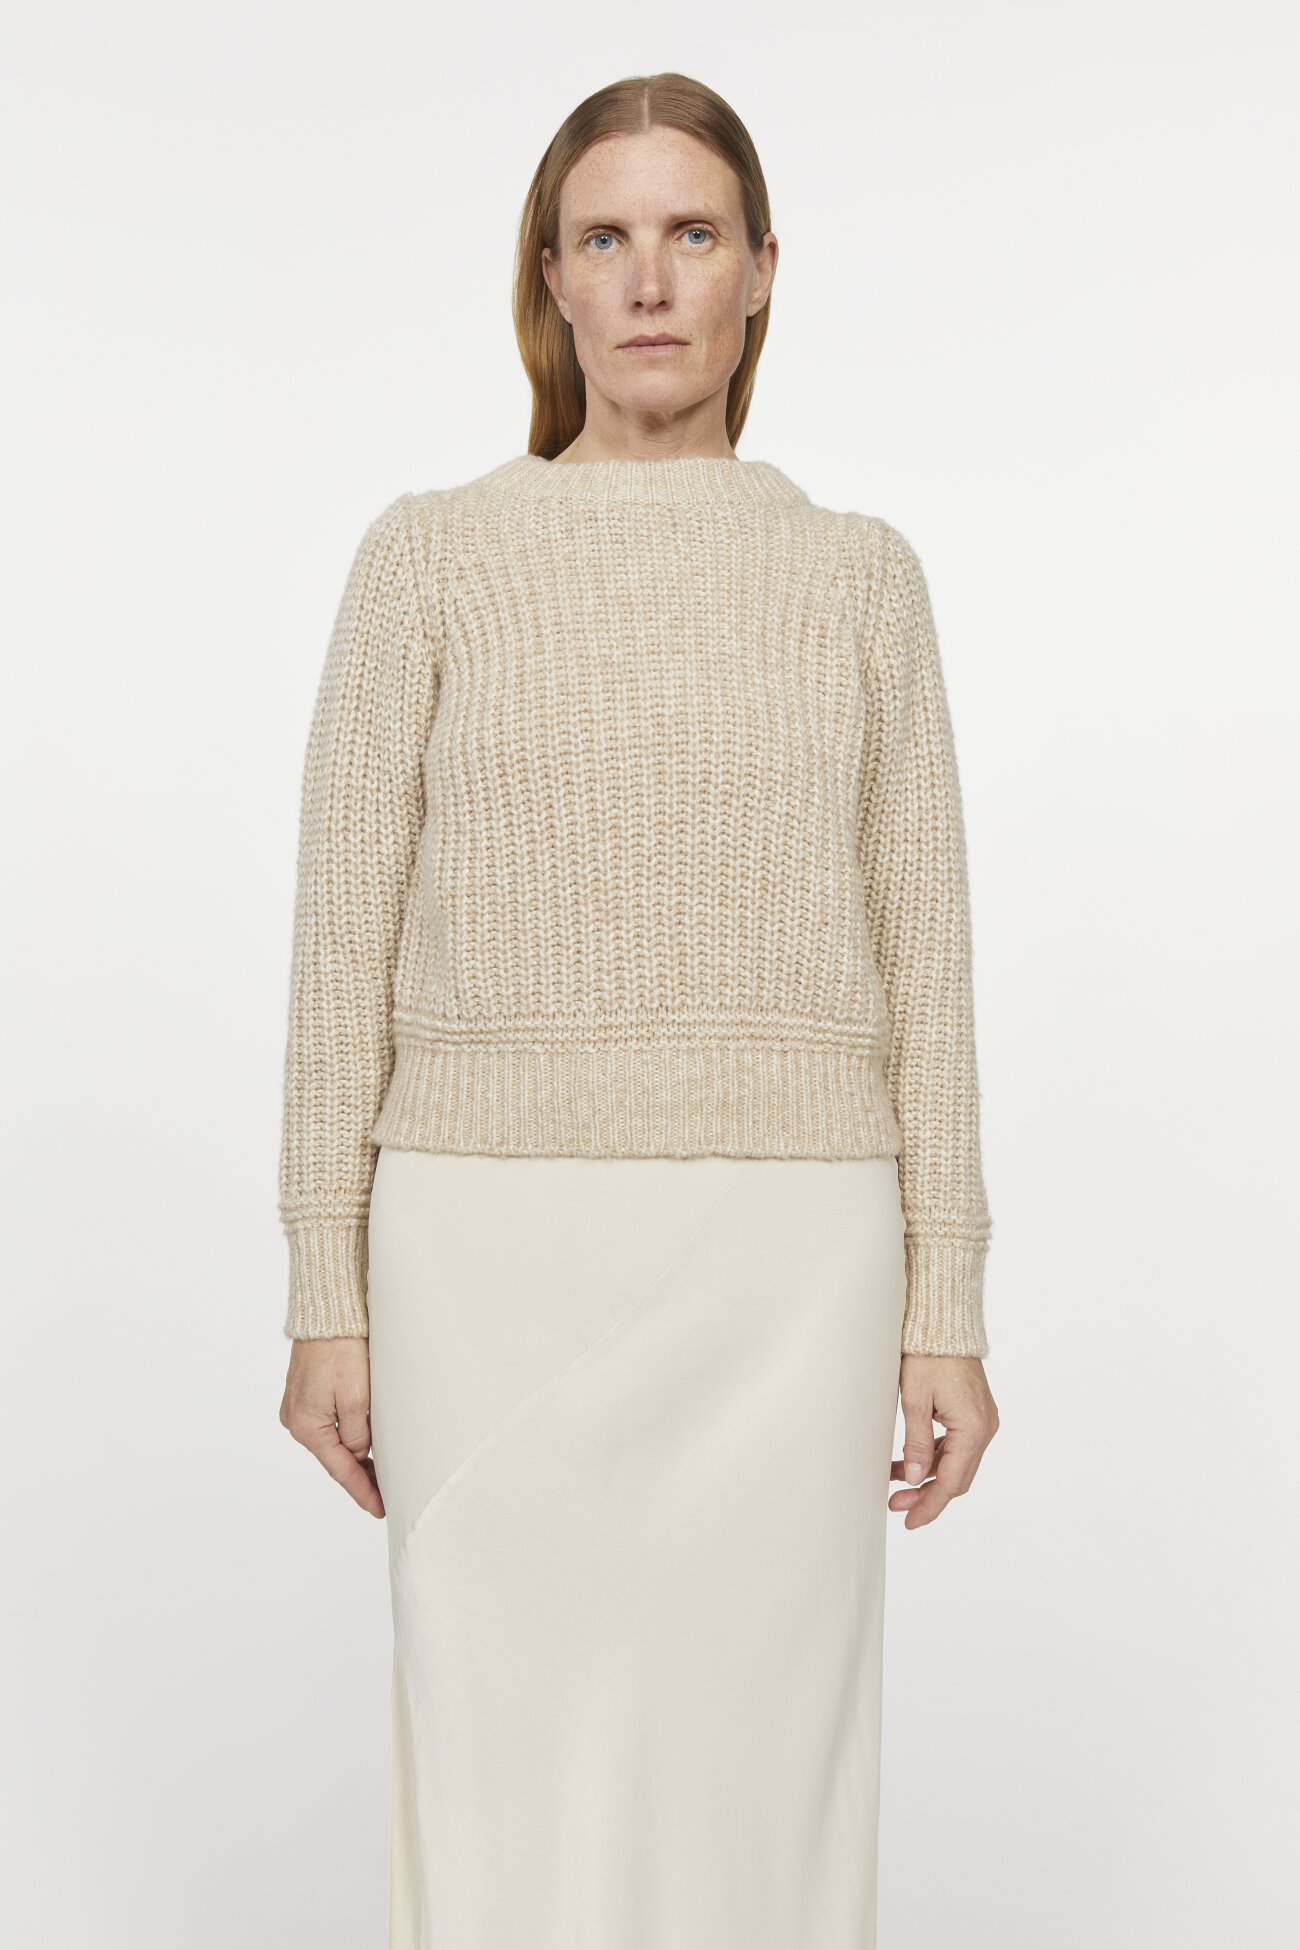 Farai spring cropped knit | Rodebjer.com